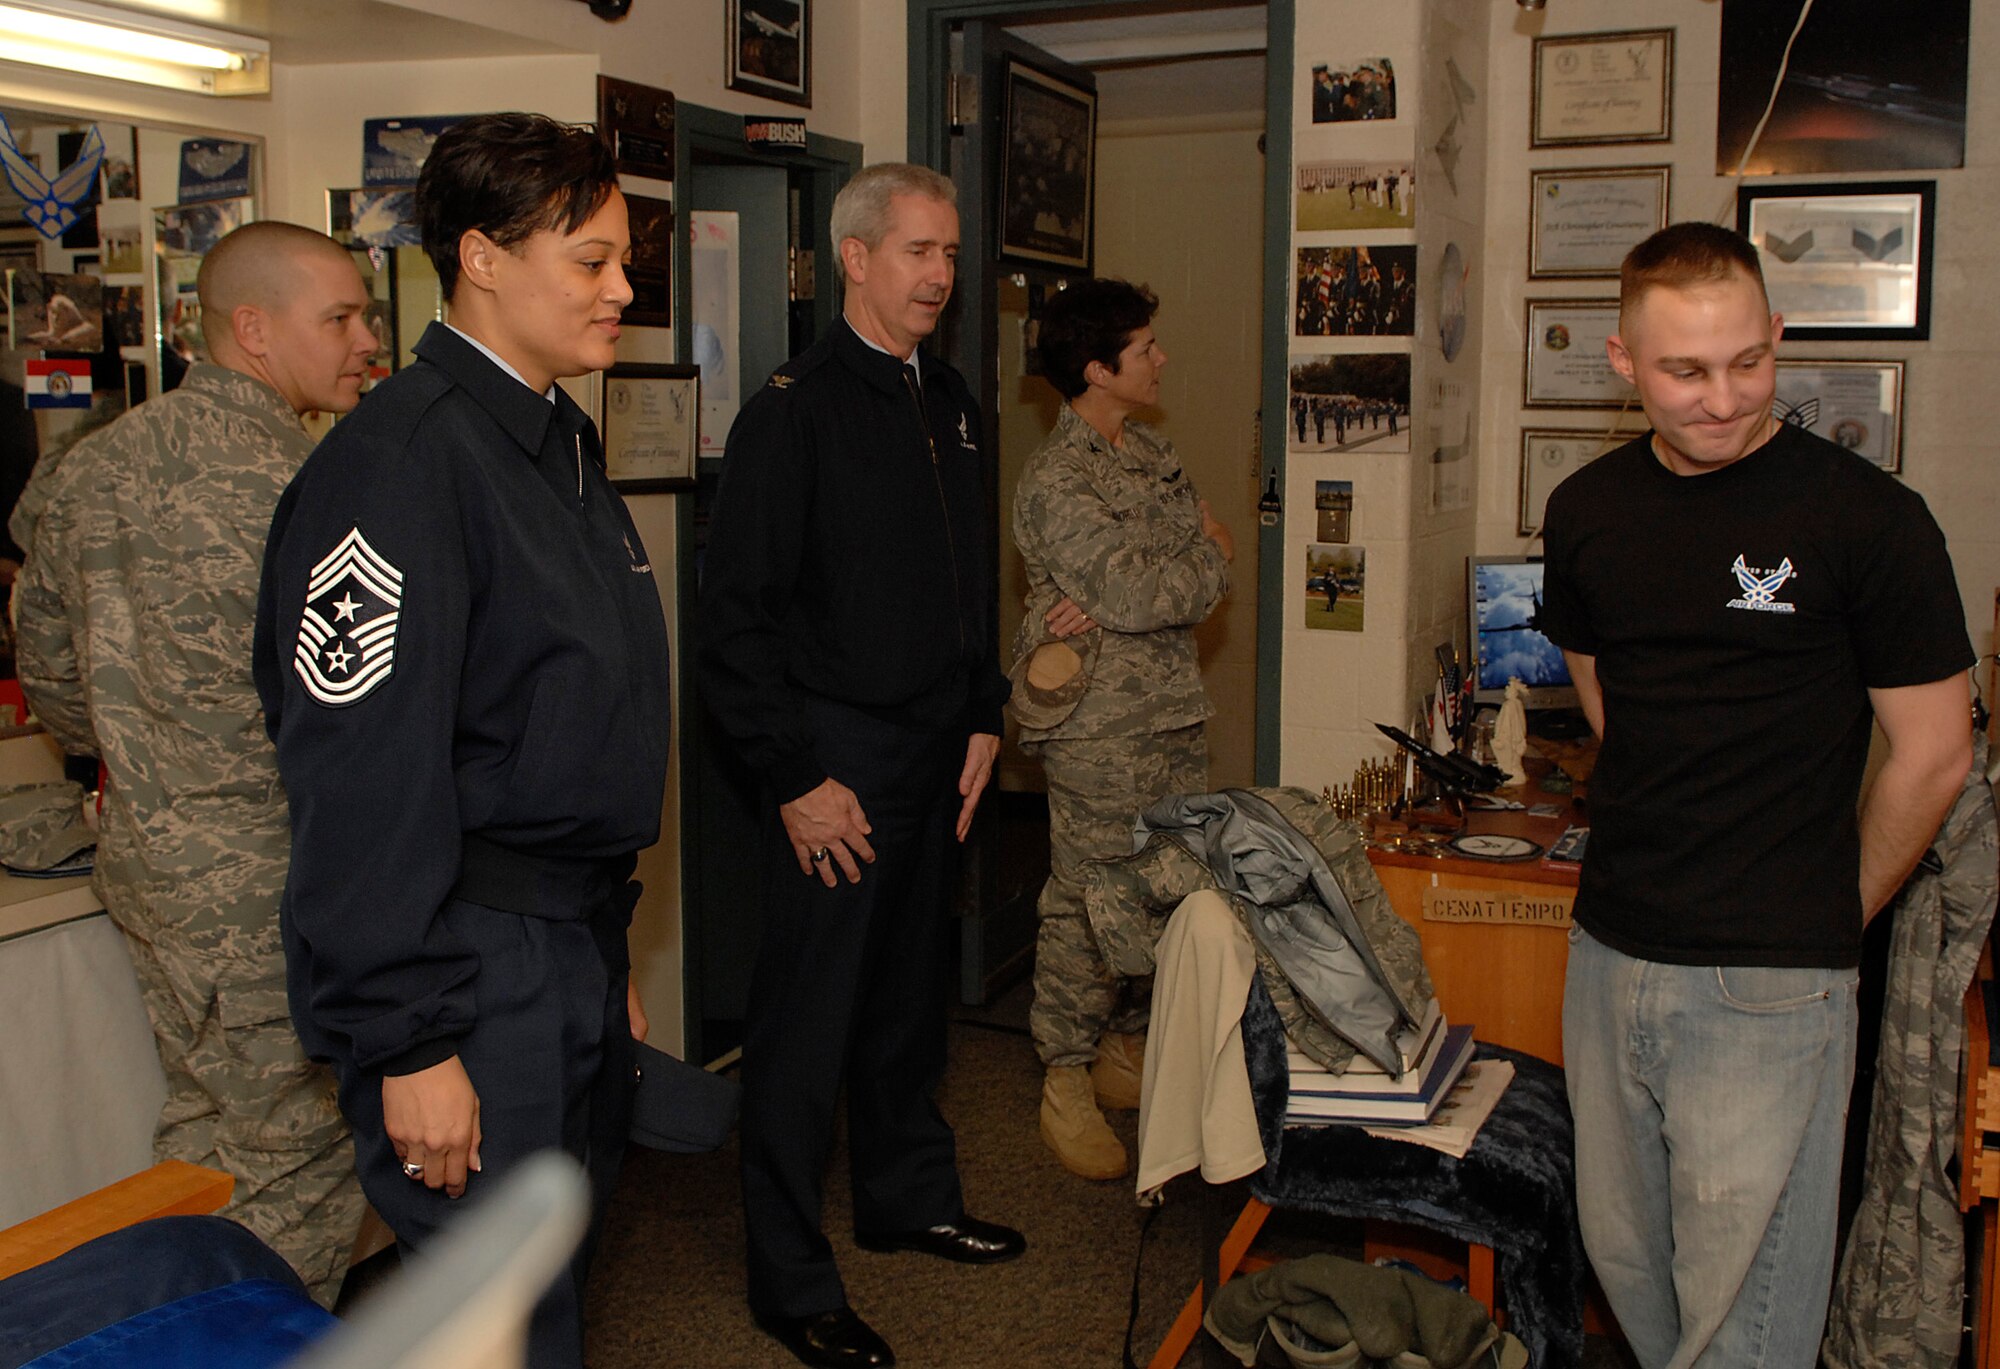 Senior Airmen Chris Cenatiempo, U.S. Air Force Honor Guard, shows members of the 11th Wing leadership items in his dorm room on Bolling AFB. Senior Leadership visited the dorms to deliver cookies to the Airmen as part of the annual Commander’s Cookie Caper sponsored by the Wing and the Air Force Officers Wives Club  (U.S. Air Force photo by Senior Tim Chacon)(Released)